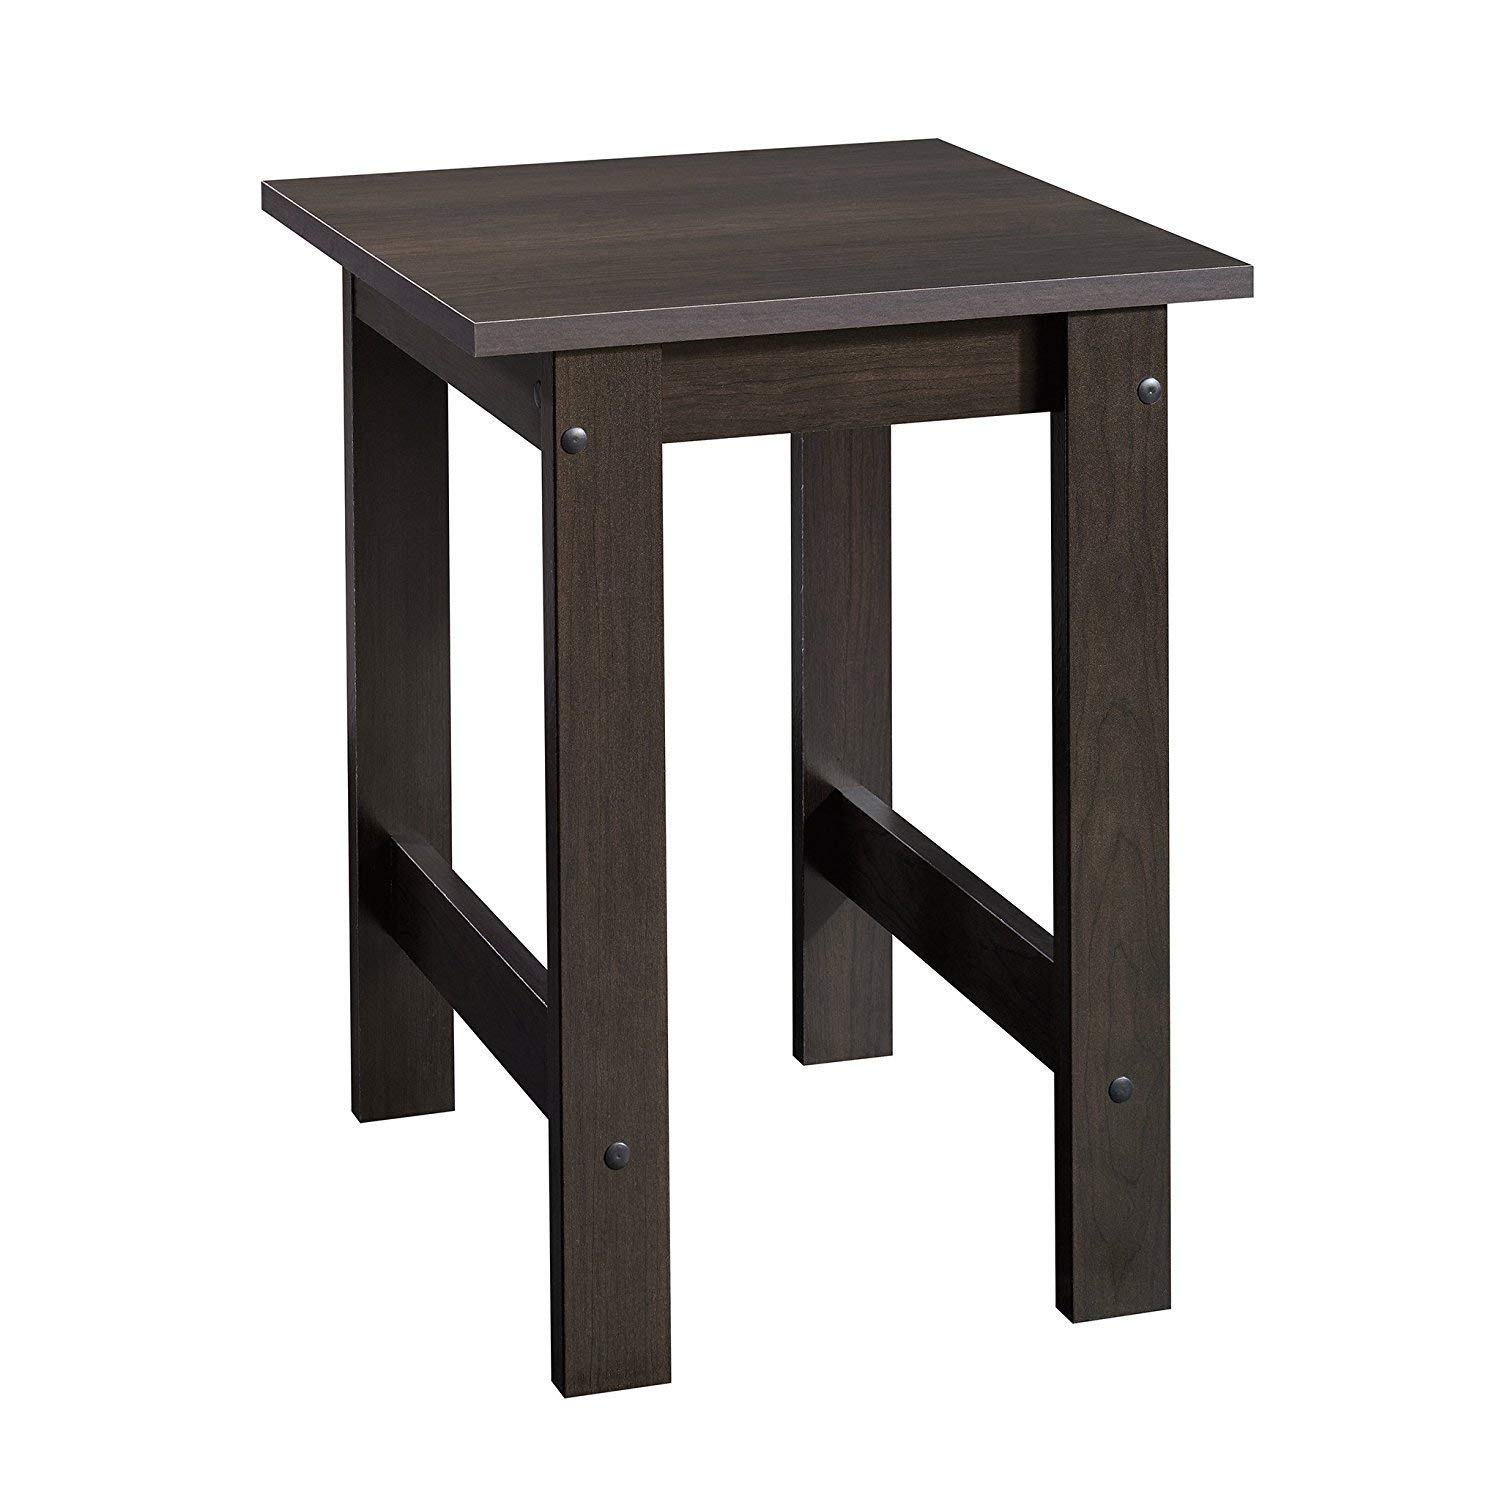 sauder beginnings end table kqoel storage accent black room essentials cinnamon cherry finish kitchen dining diy barndoor outdoor and chairs target asian lamps pier one tro coffee